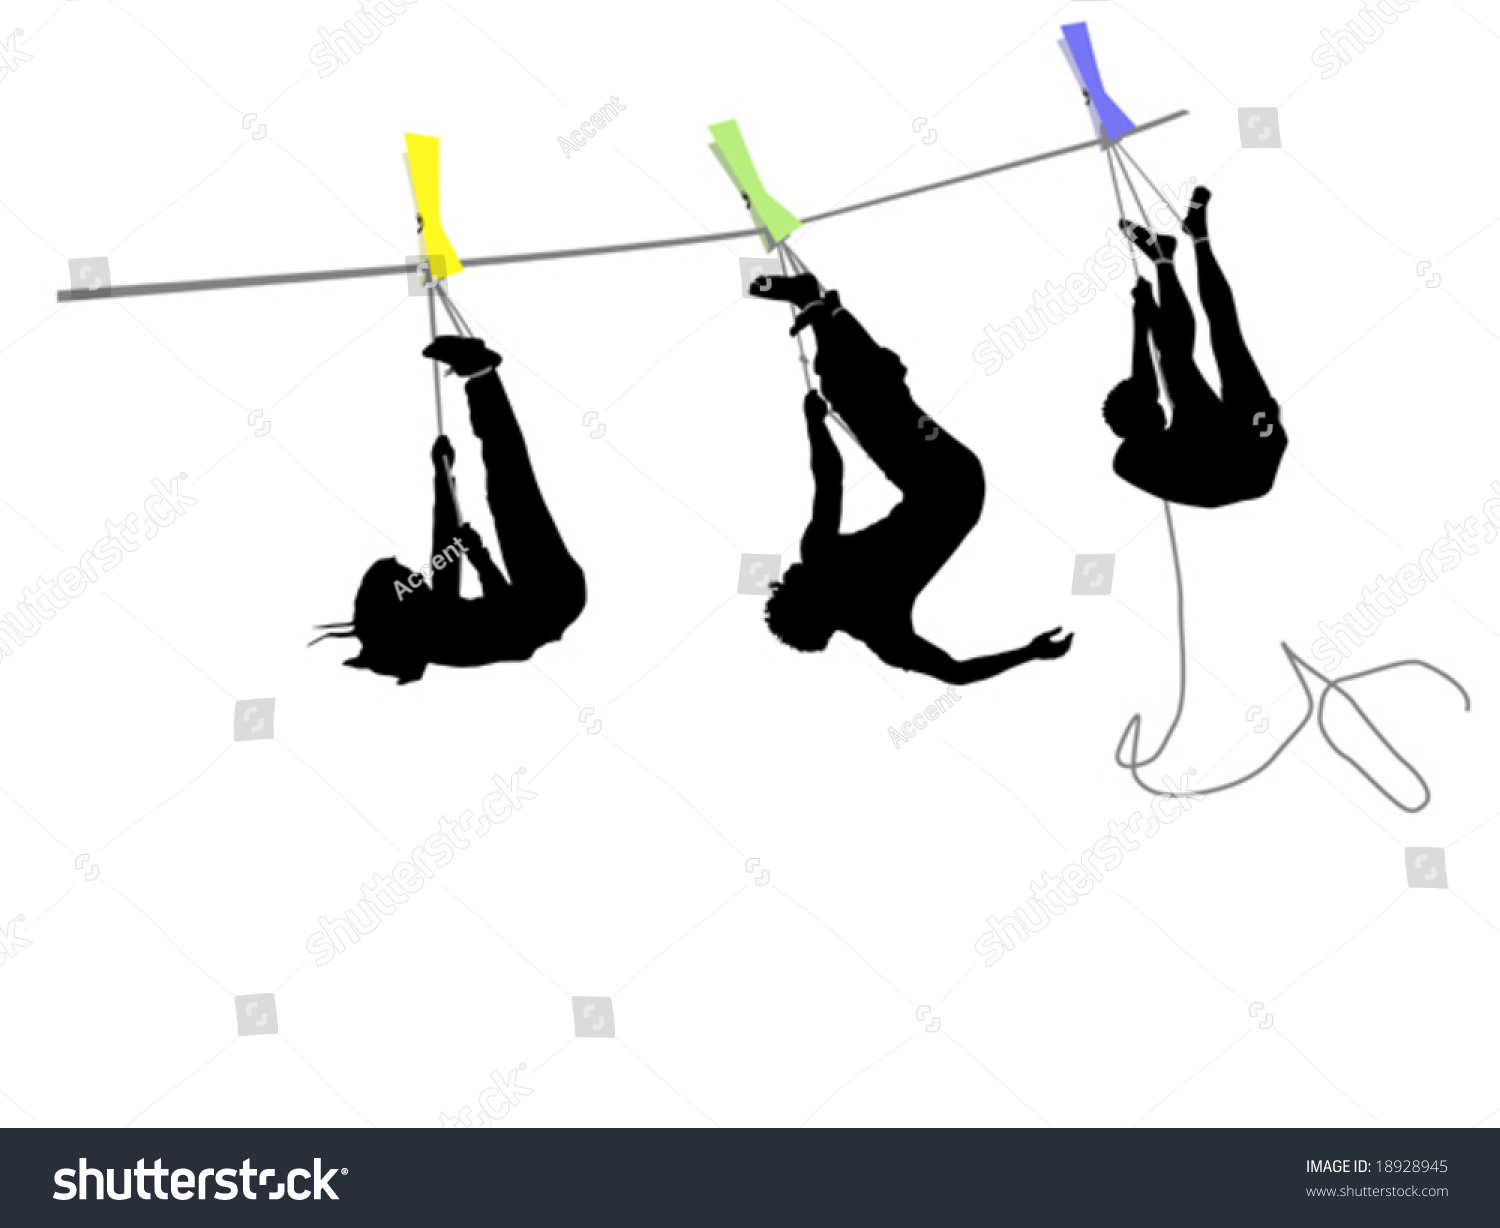 People Hanging On Rope Stock Vector 18928945 - Shutterstock